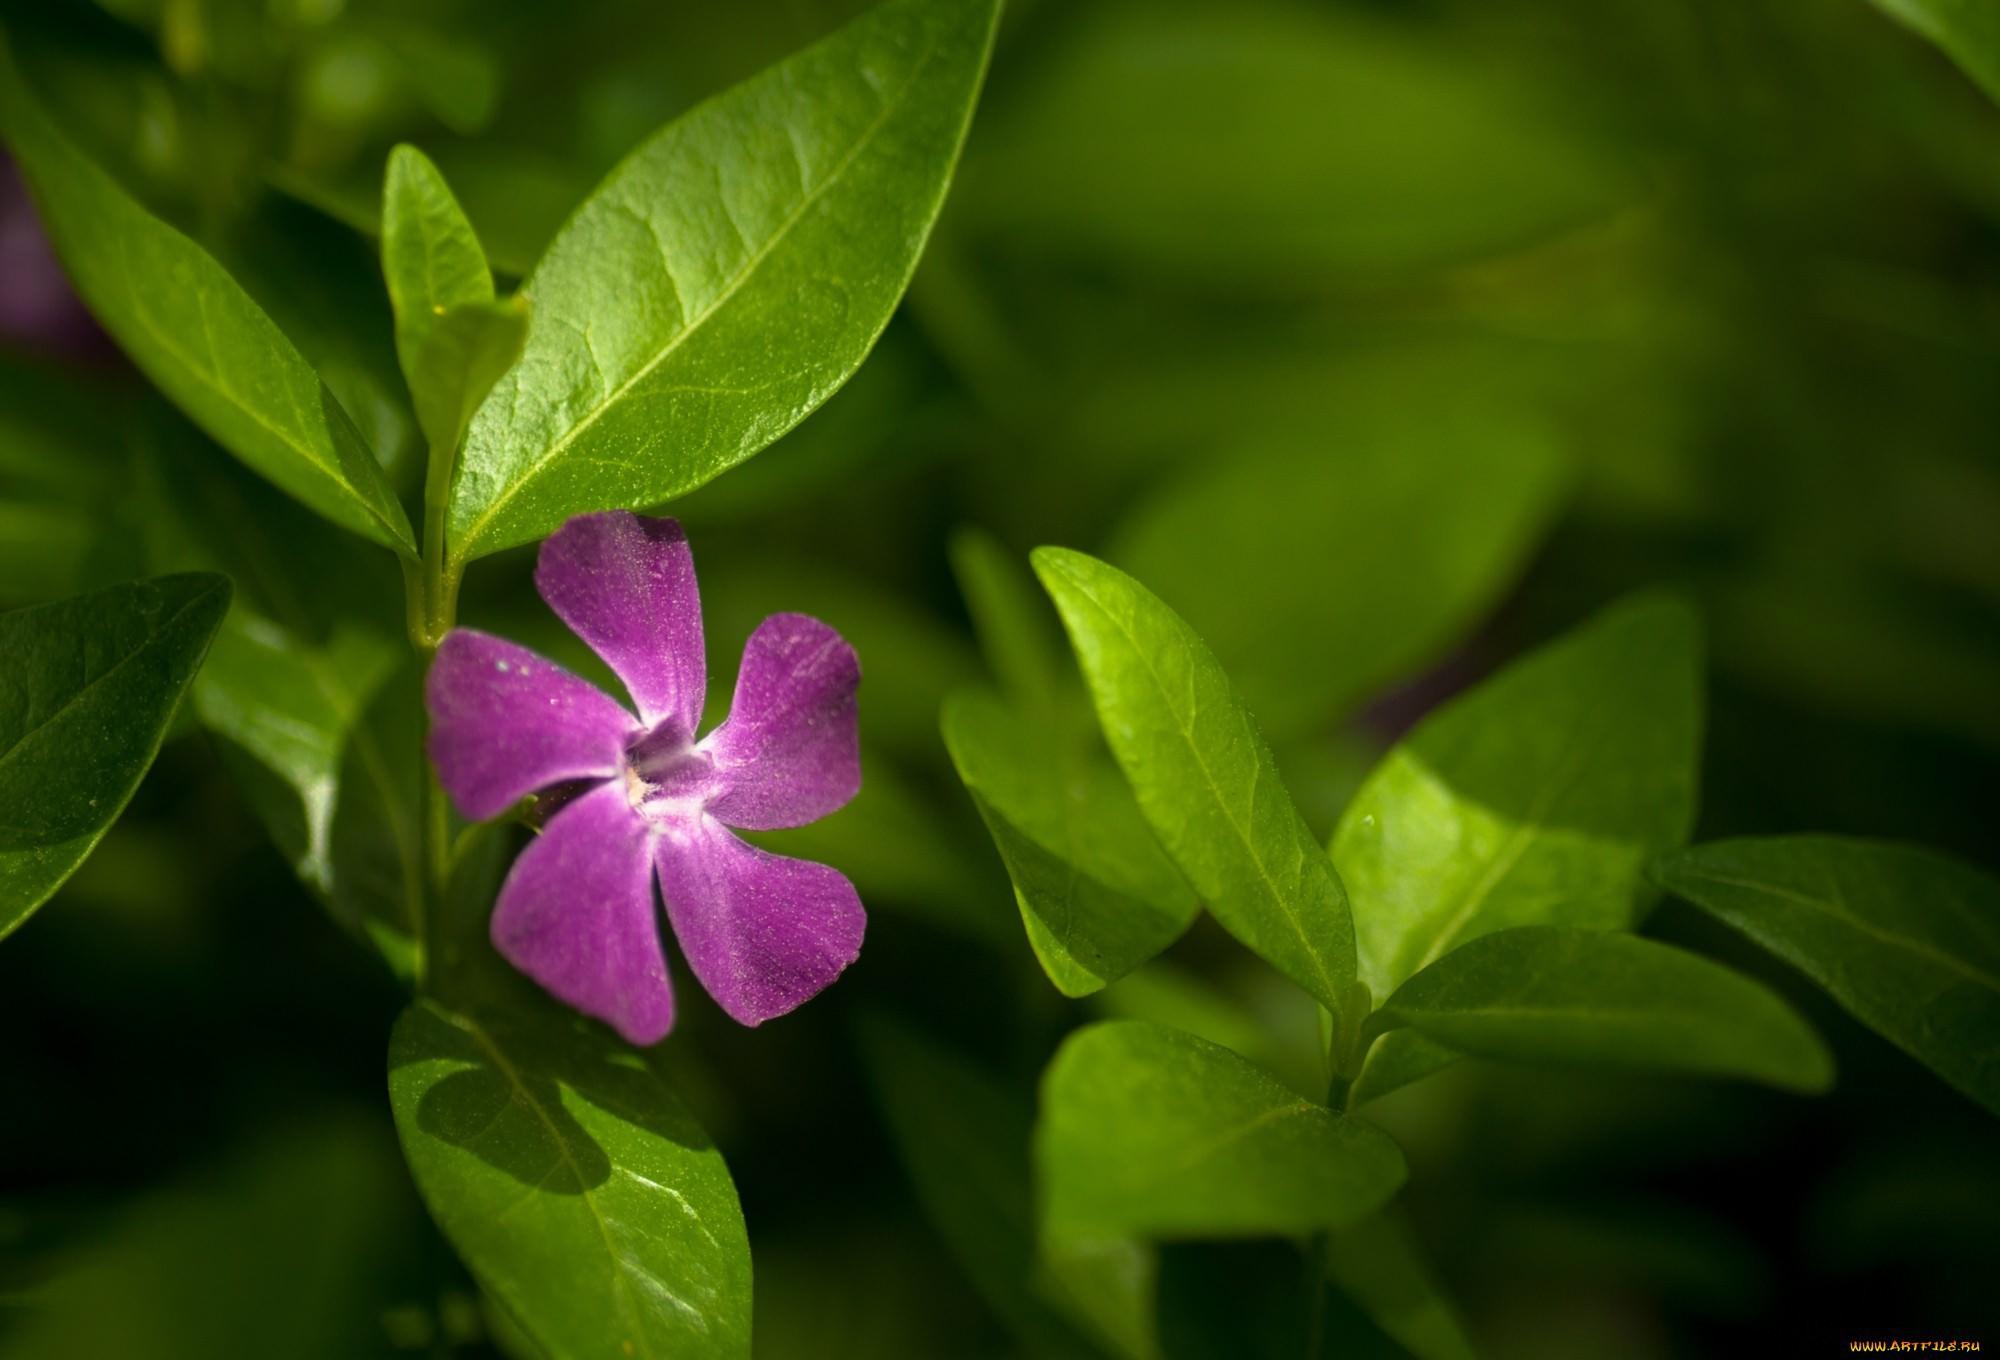 Periwinkle flower growing in the garden wallpaper and image